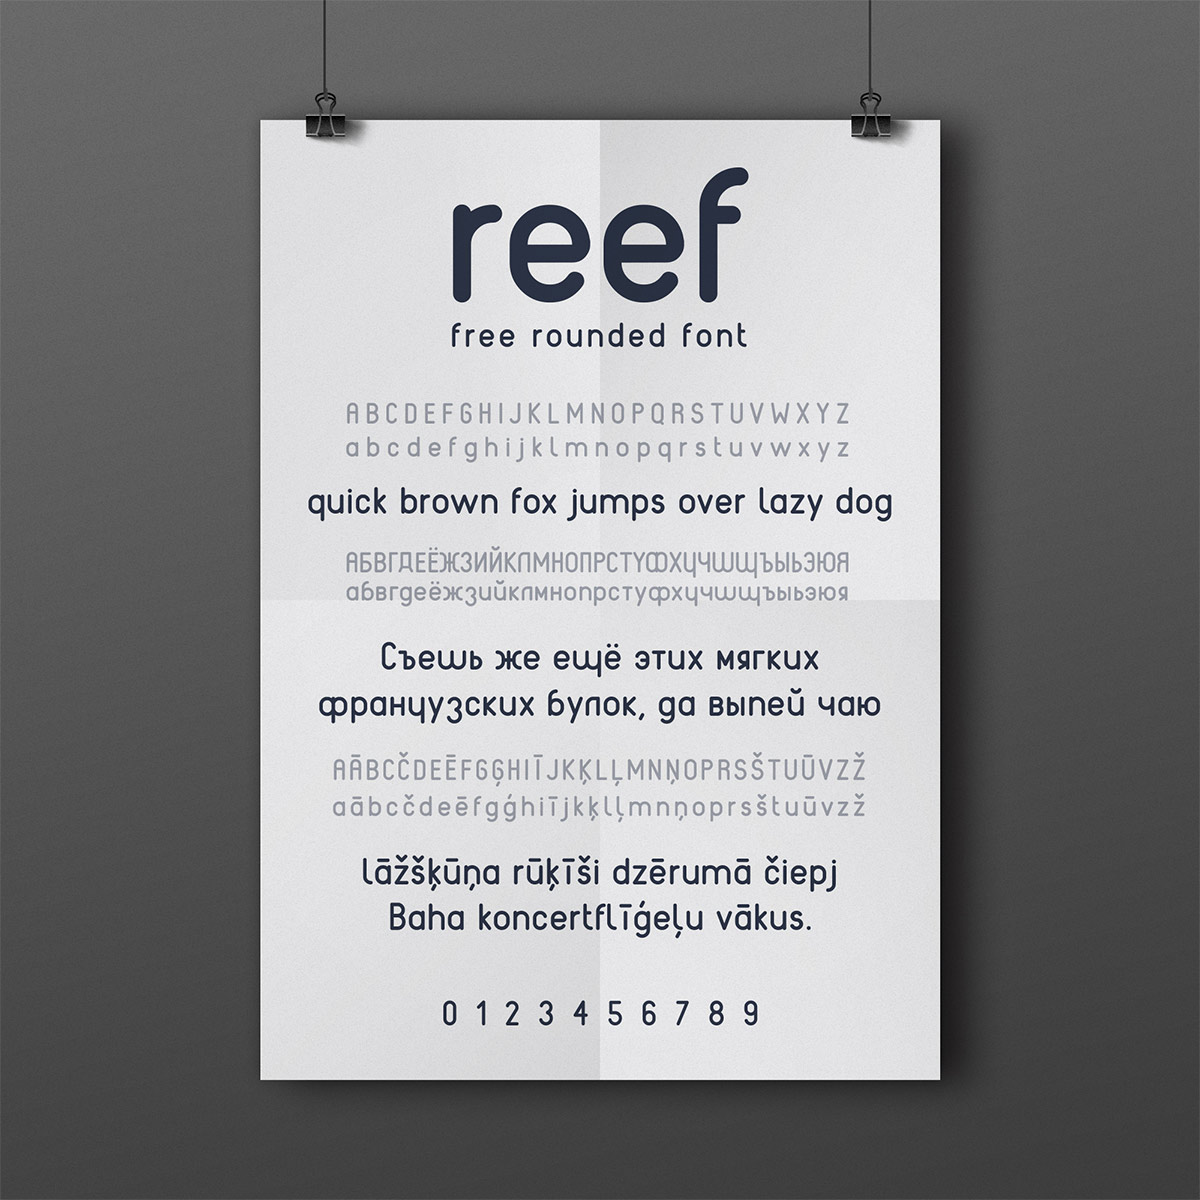 reef-free-rounded-font04